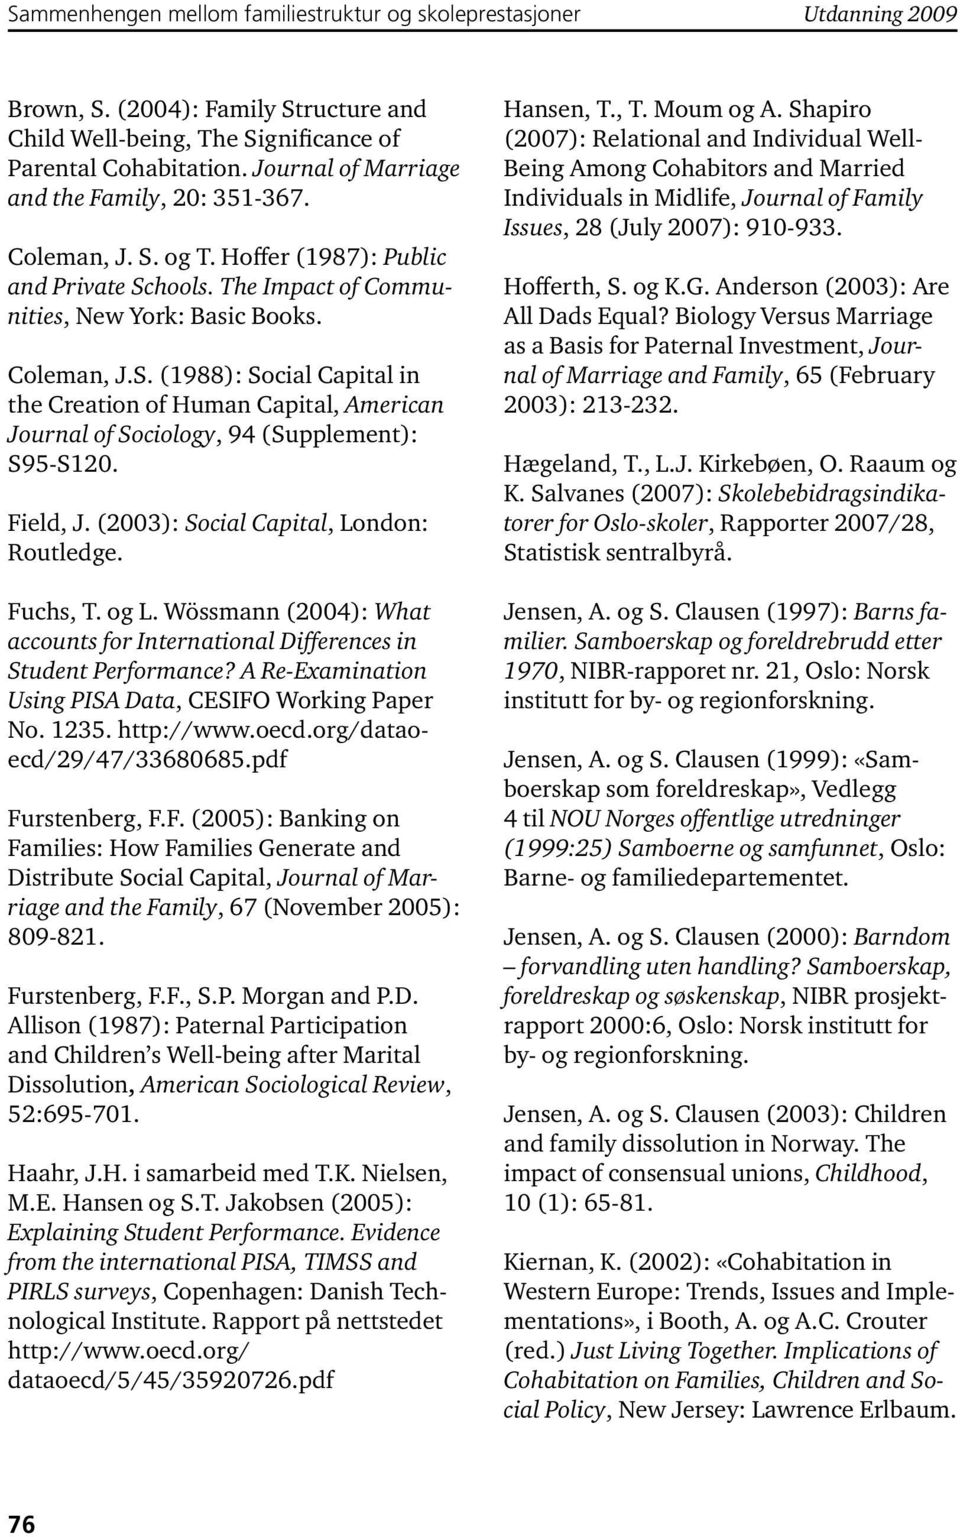 Field, J. (2003): Social Capital, London: Routledge. Fuchs, T. og L. Wössmann (2004): What accounts for International Differences in Student Performance?